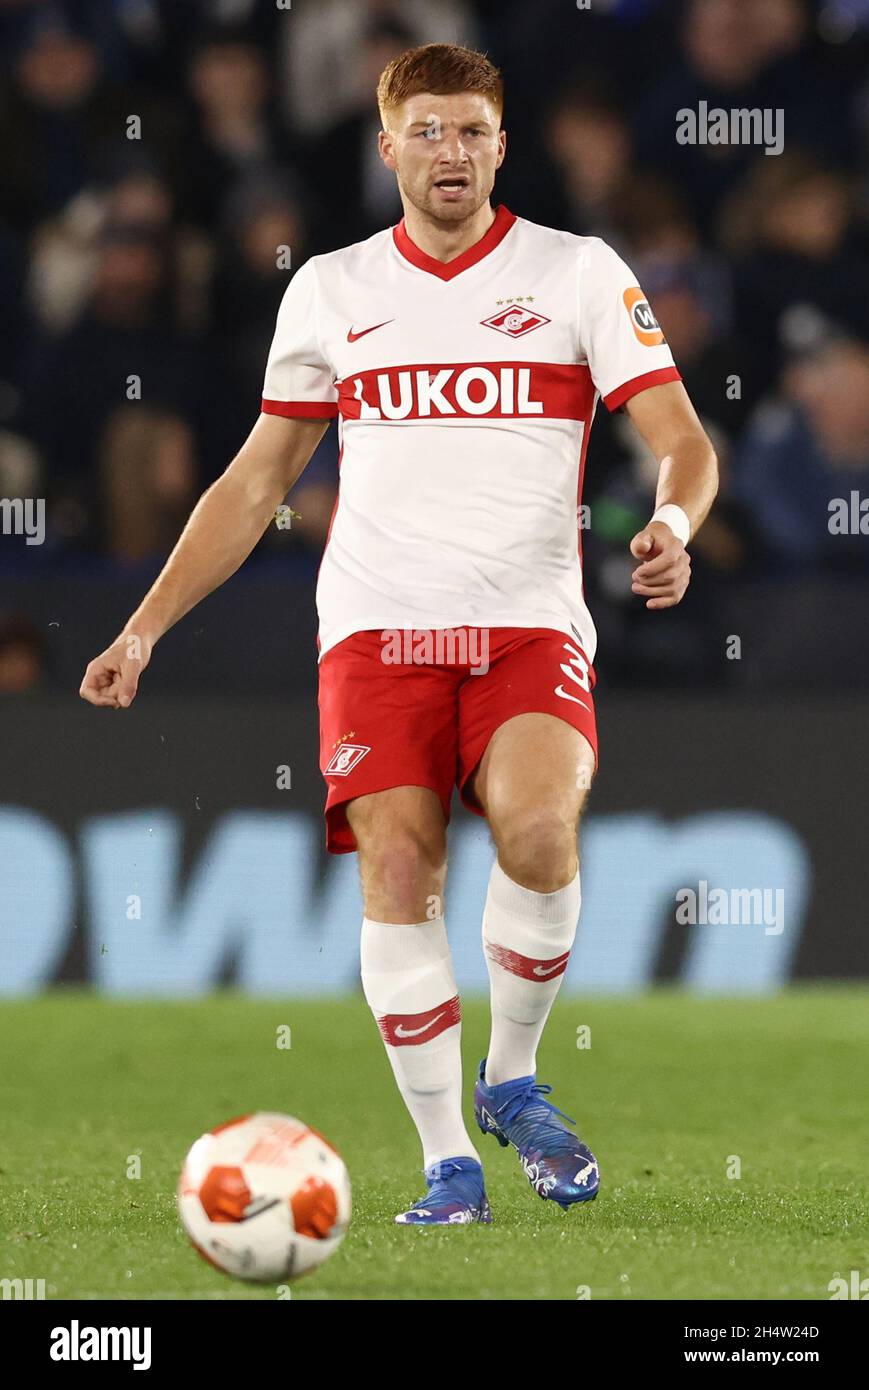 Leicester, England, 4th November 2021.  Maximiliano Caufriez of Spartak Moscow during the UEFA Europa League match at the King Power Stadium, Leicester. Picture credit should read: Darren Staples / Sportimage Stock Photo